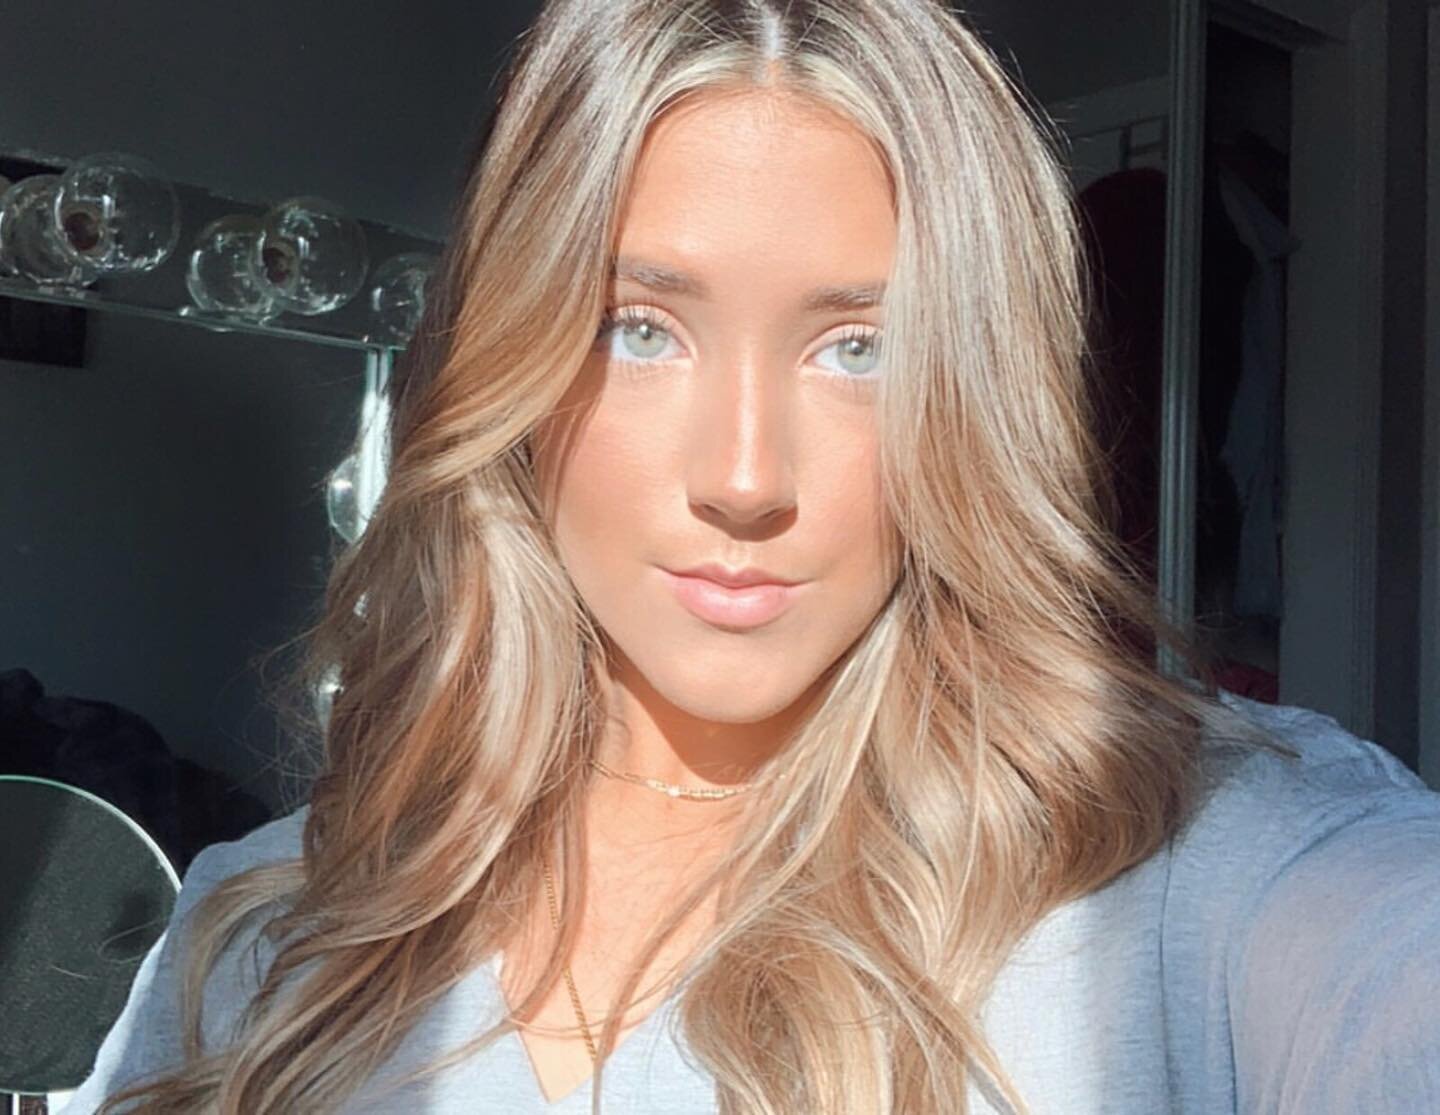 That good, good lighting ☀️

Color by Leah 

#allyouneedisgoodhair #balayage #beautycoach #hairbrained #maneaddicts #bestofbalayage #moneypiece #crafthairdresser #clientselfie #randco #iamgoldwell #behindthechair #goldwell #hairgoals